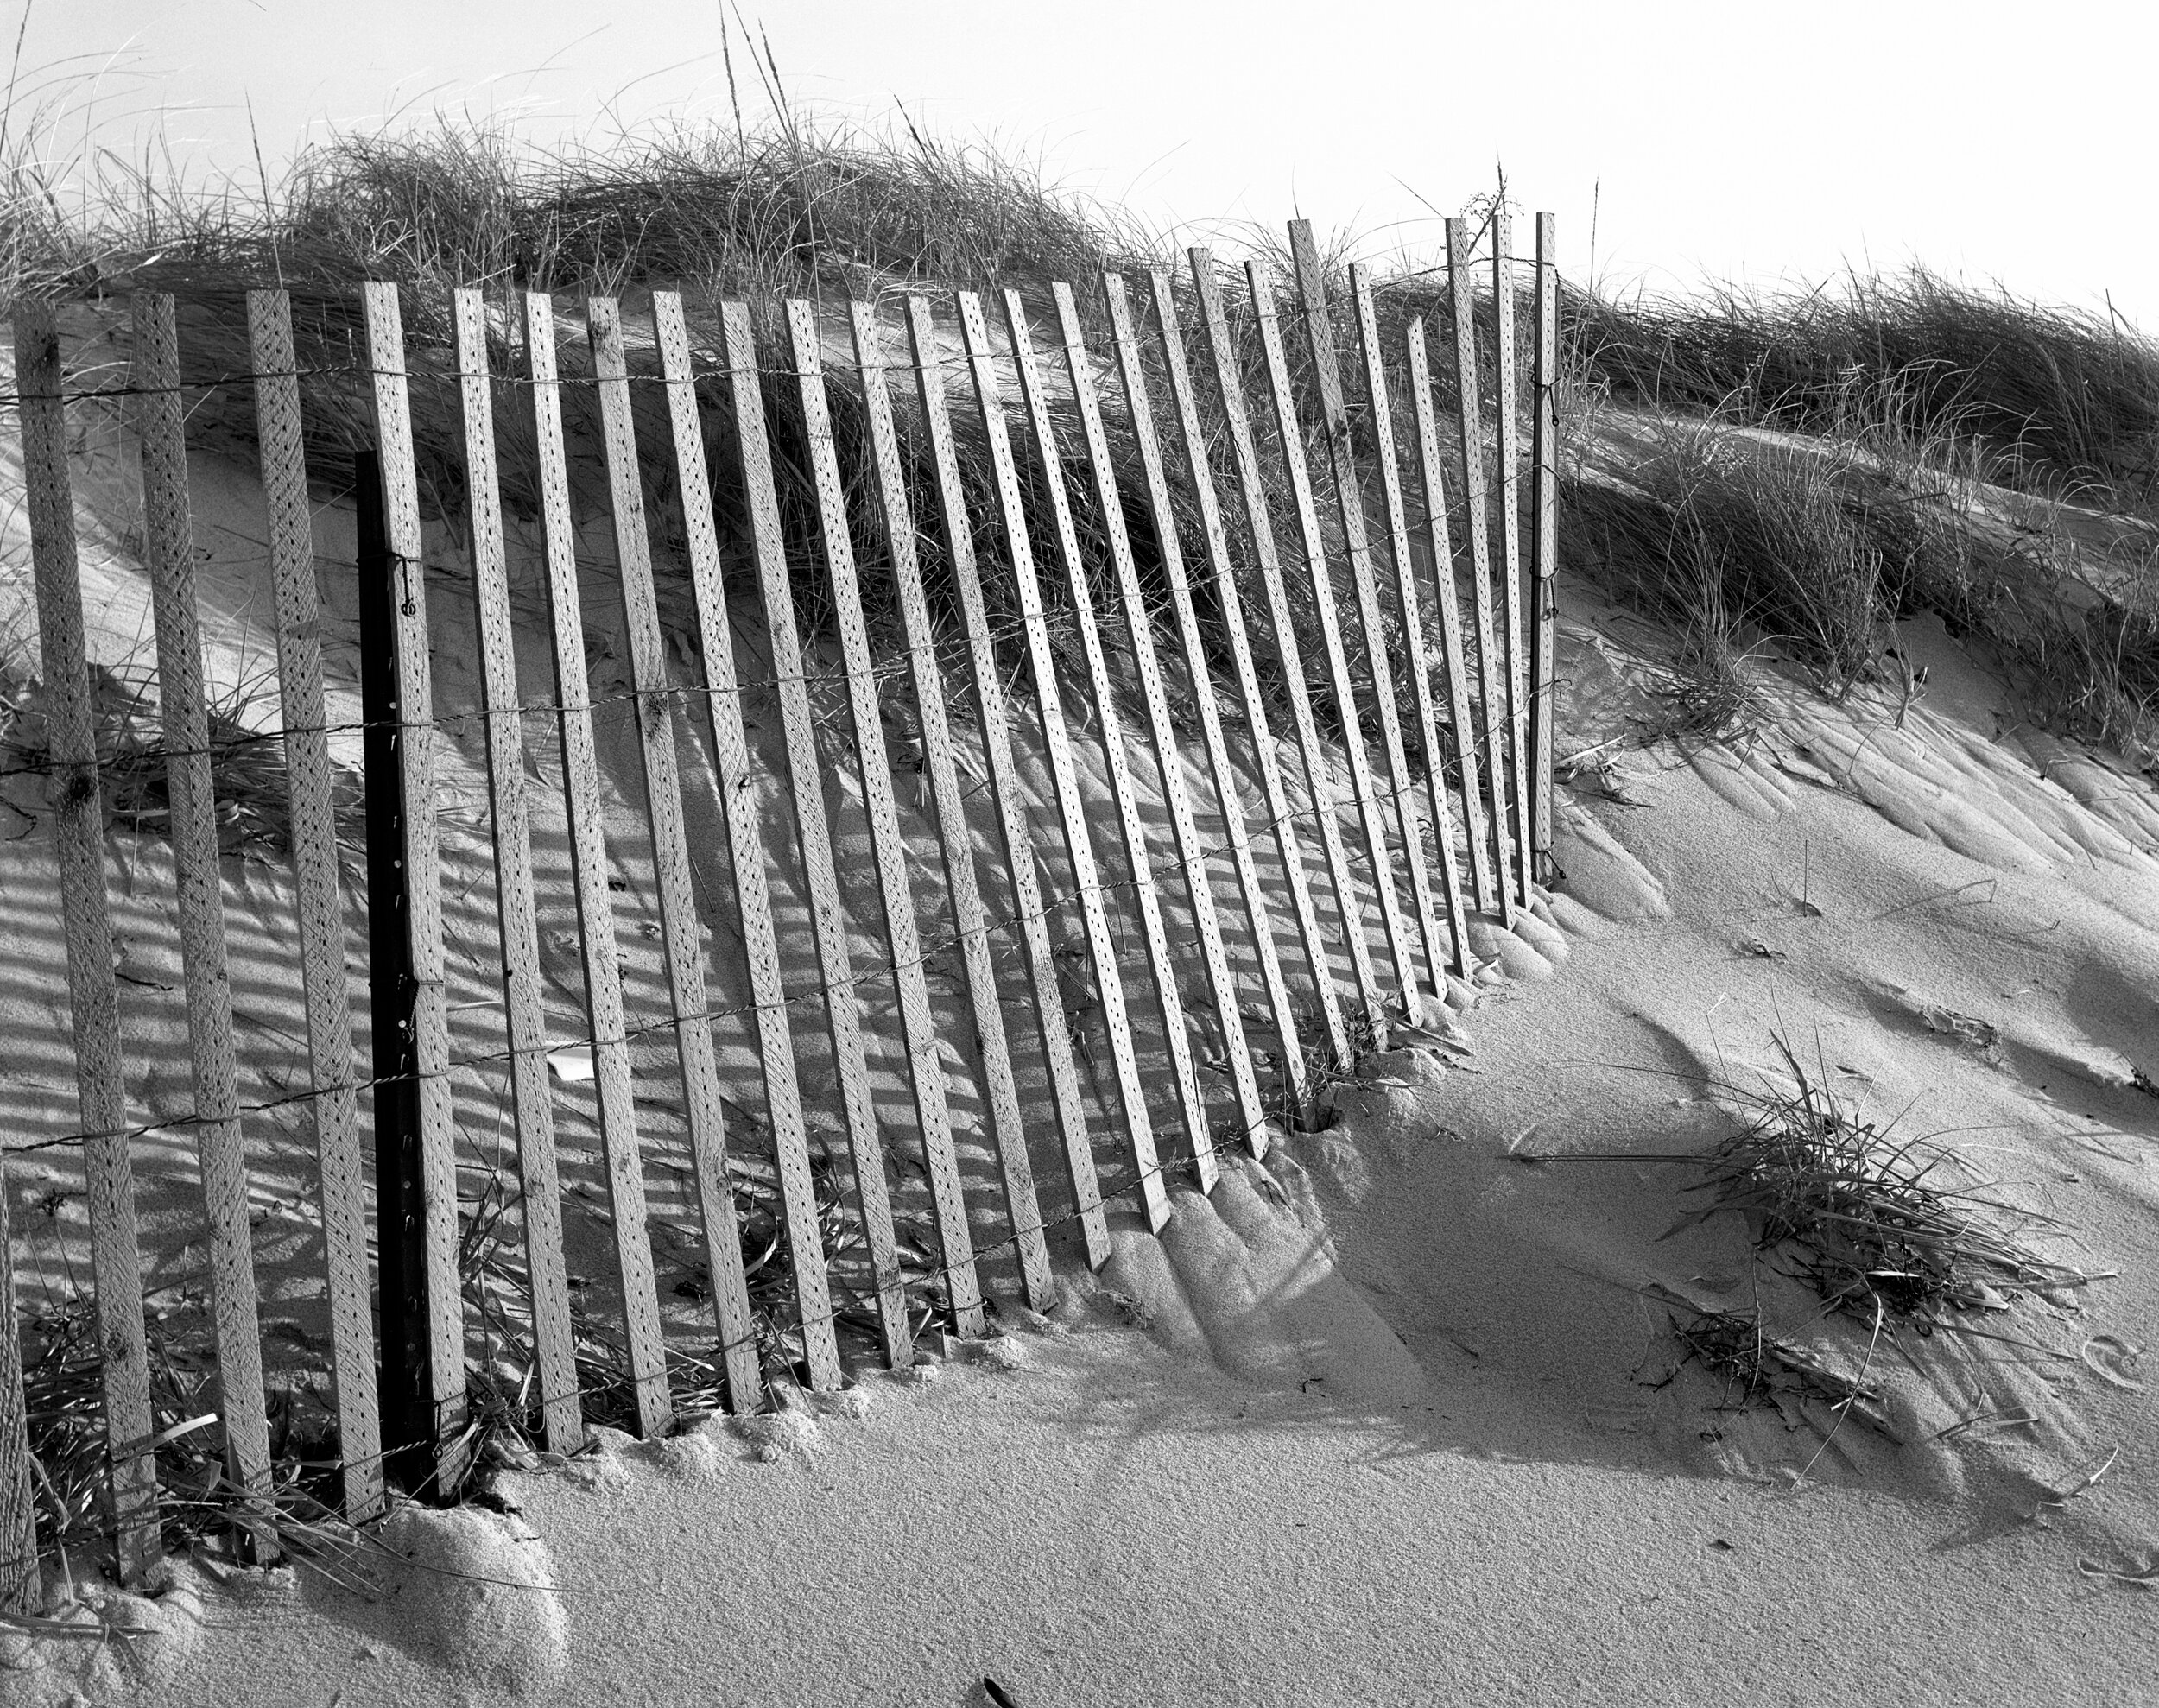 Fence and Sand Cape Cod (date unknown)